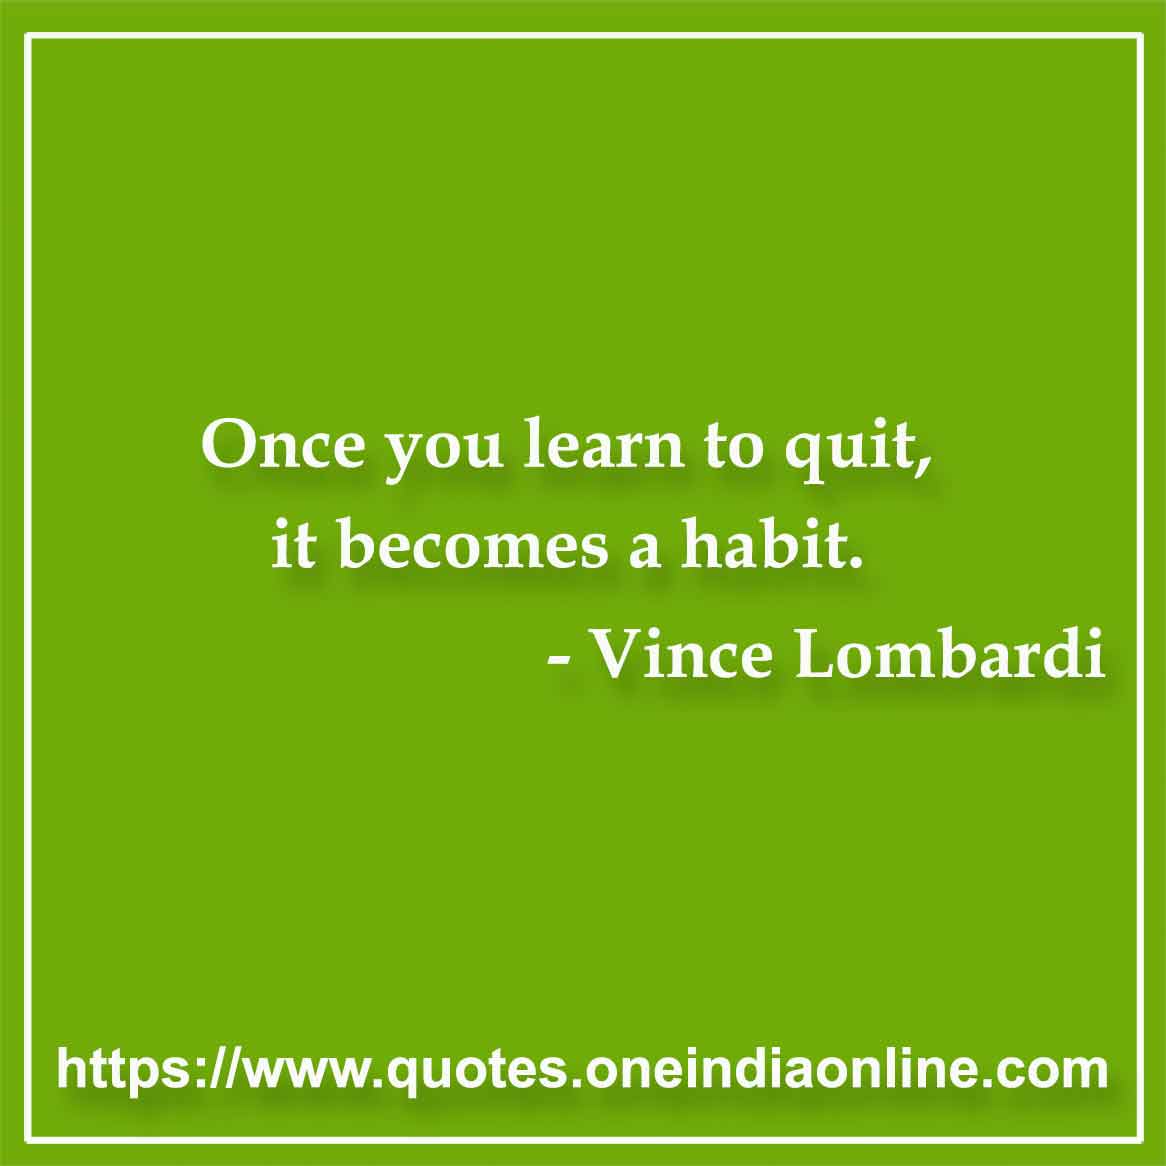 Once you learn to quit, it becomes a habit.

- Addiction Quote by Vince Lombardi 